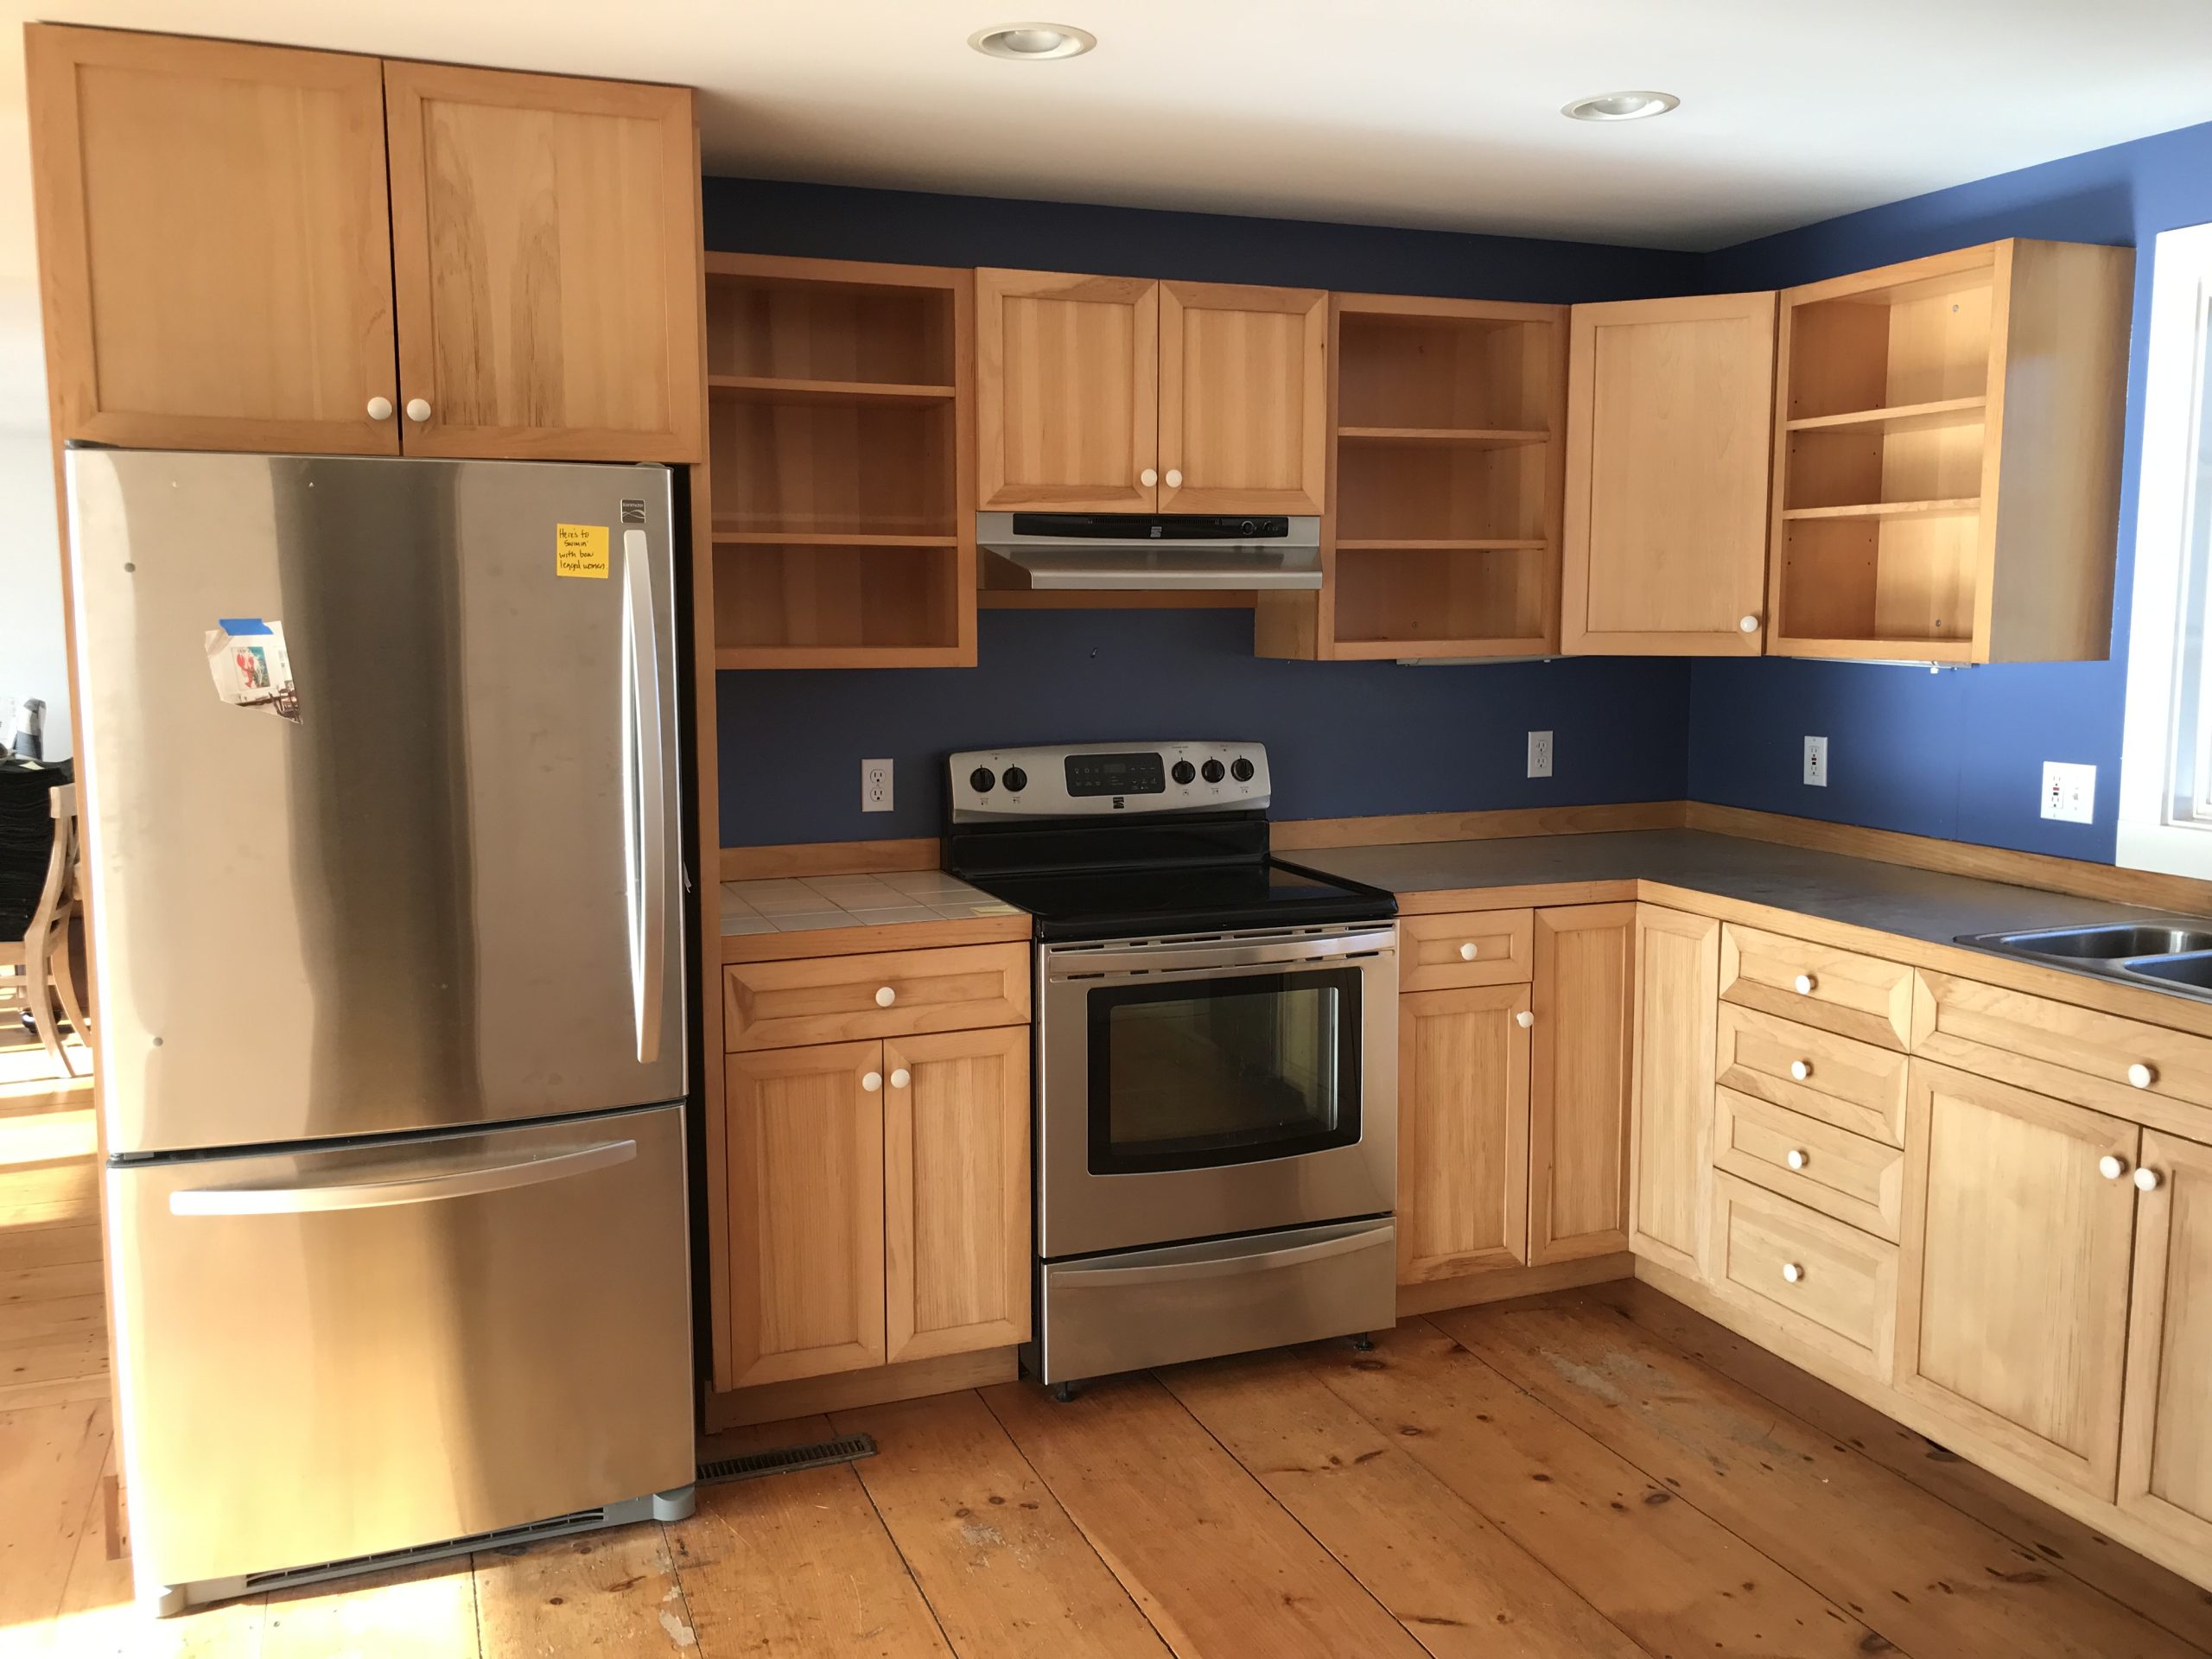 Removing Upper Cabinets in the Kitchen